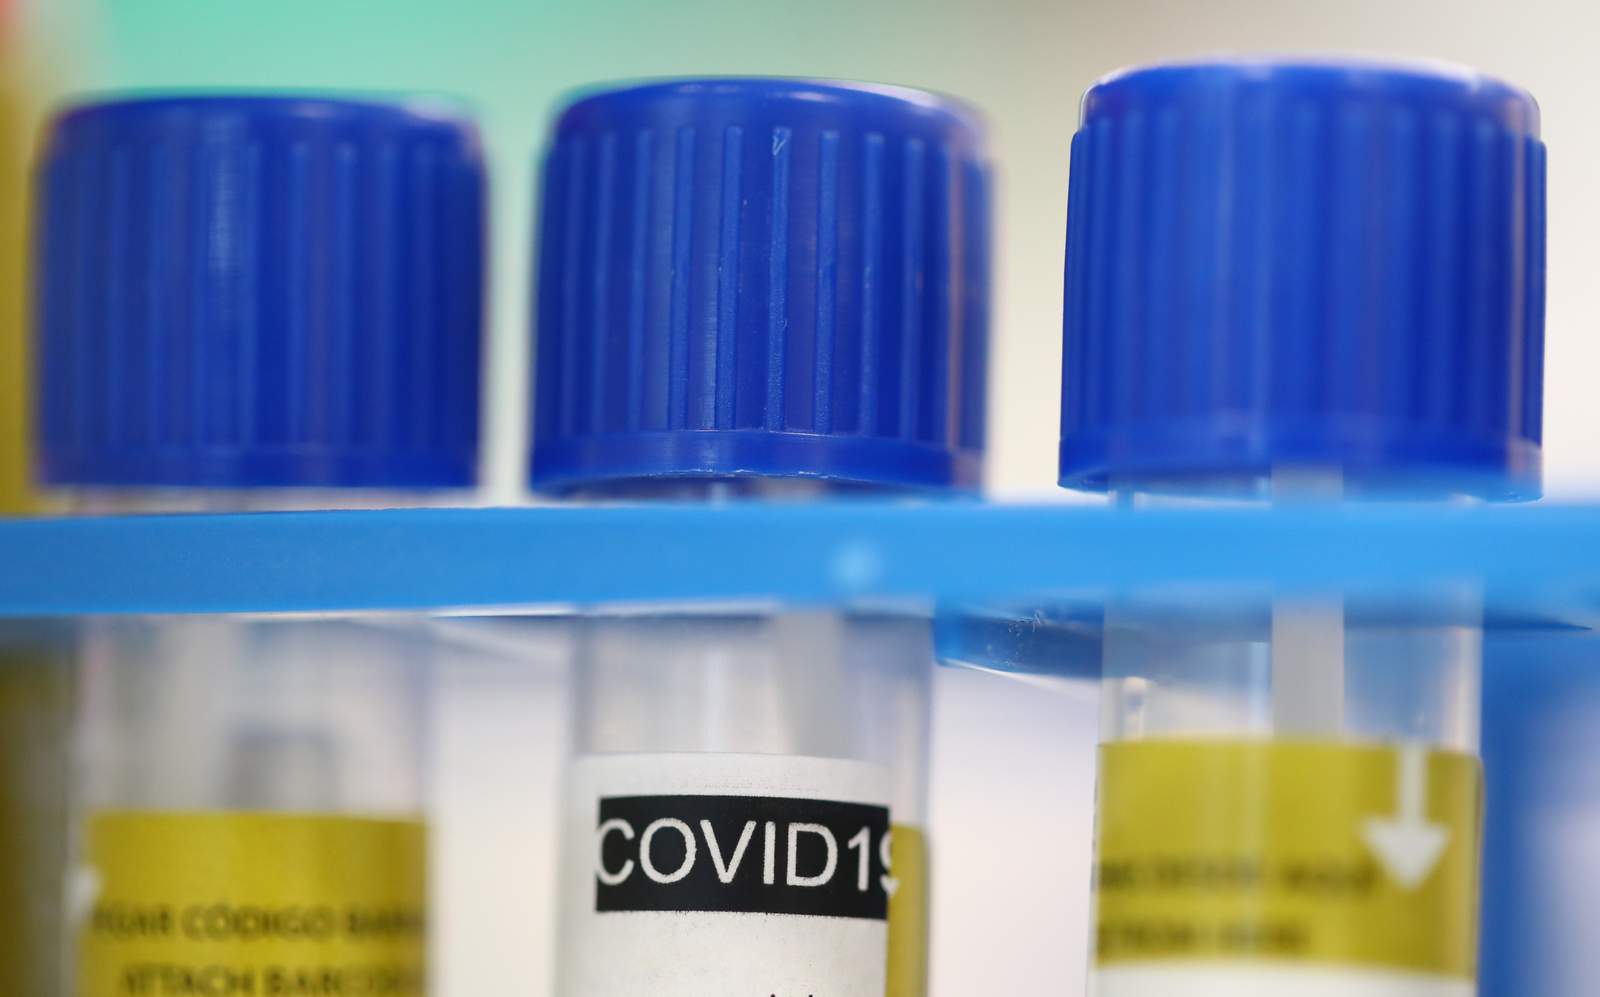 Glynn County Health Department announces new schedule for COVID-19 testing